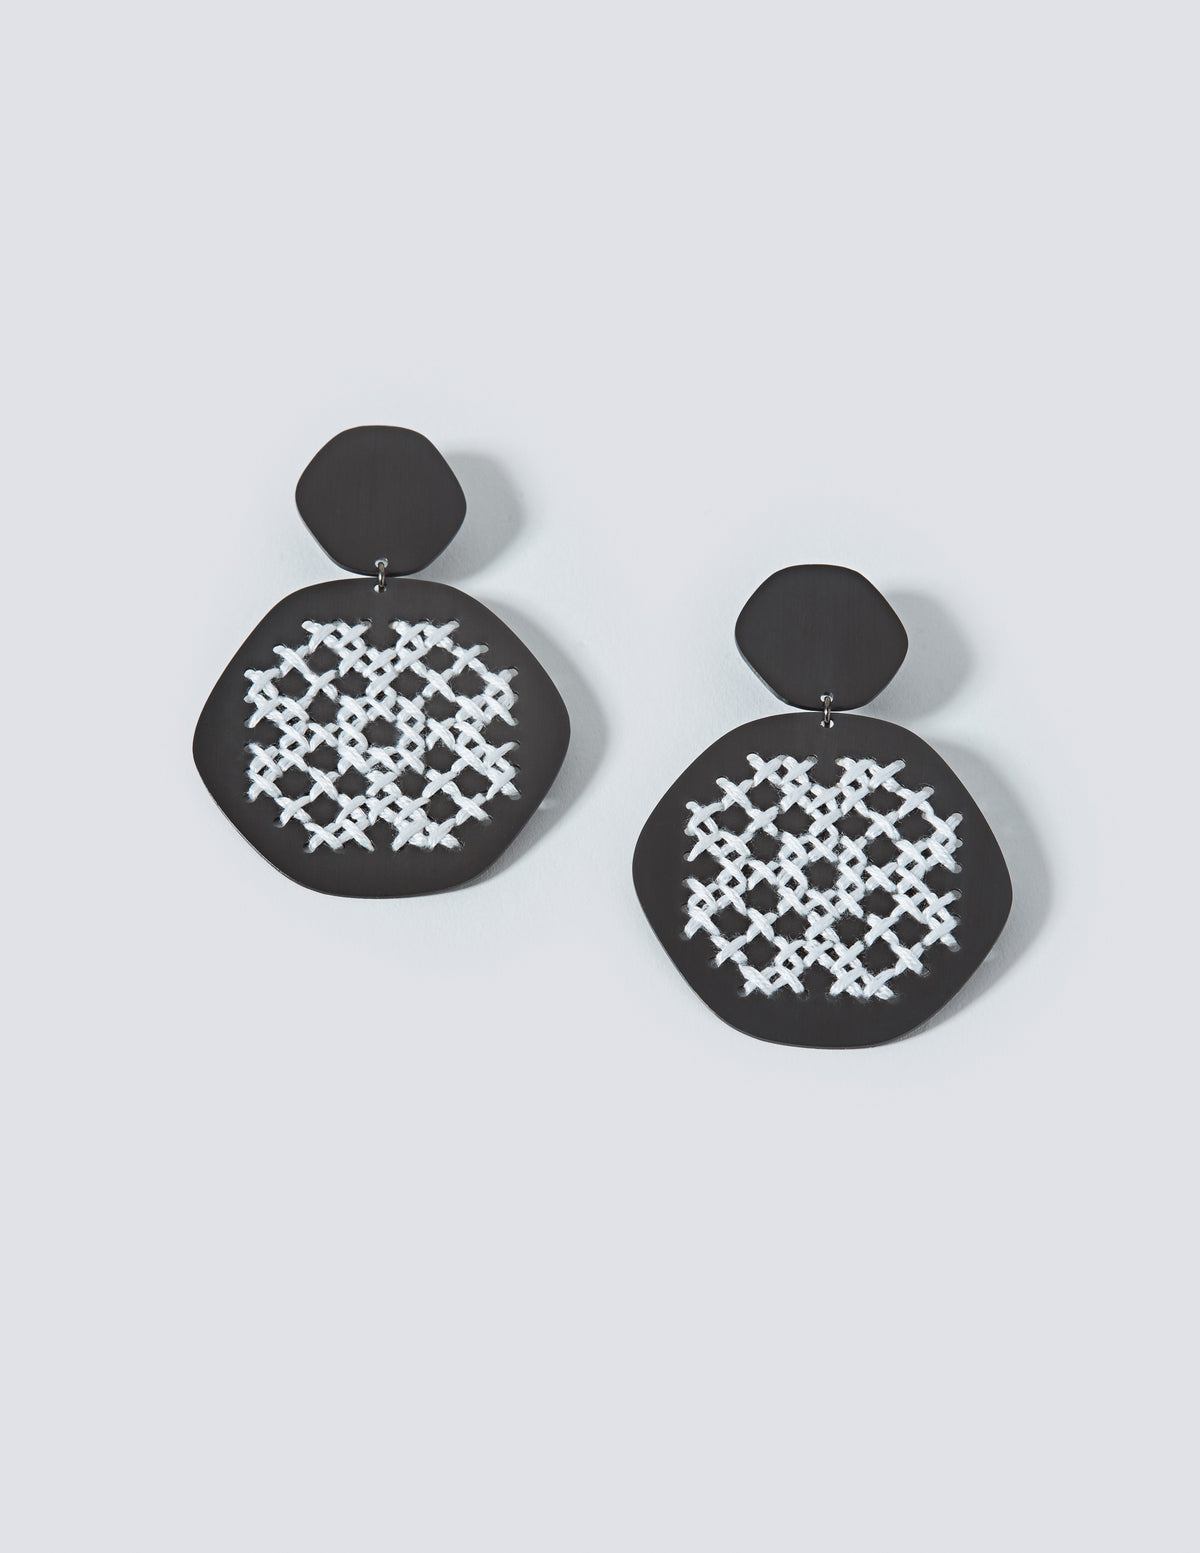 Lace Black Earrings - CHARALAMPIA